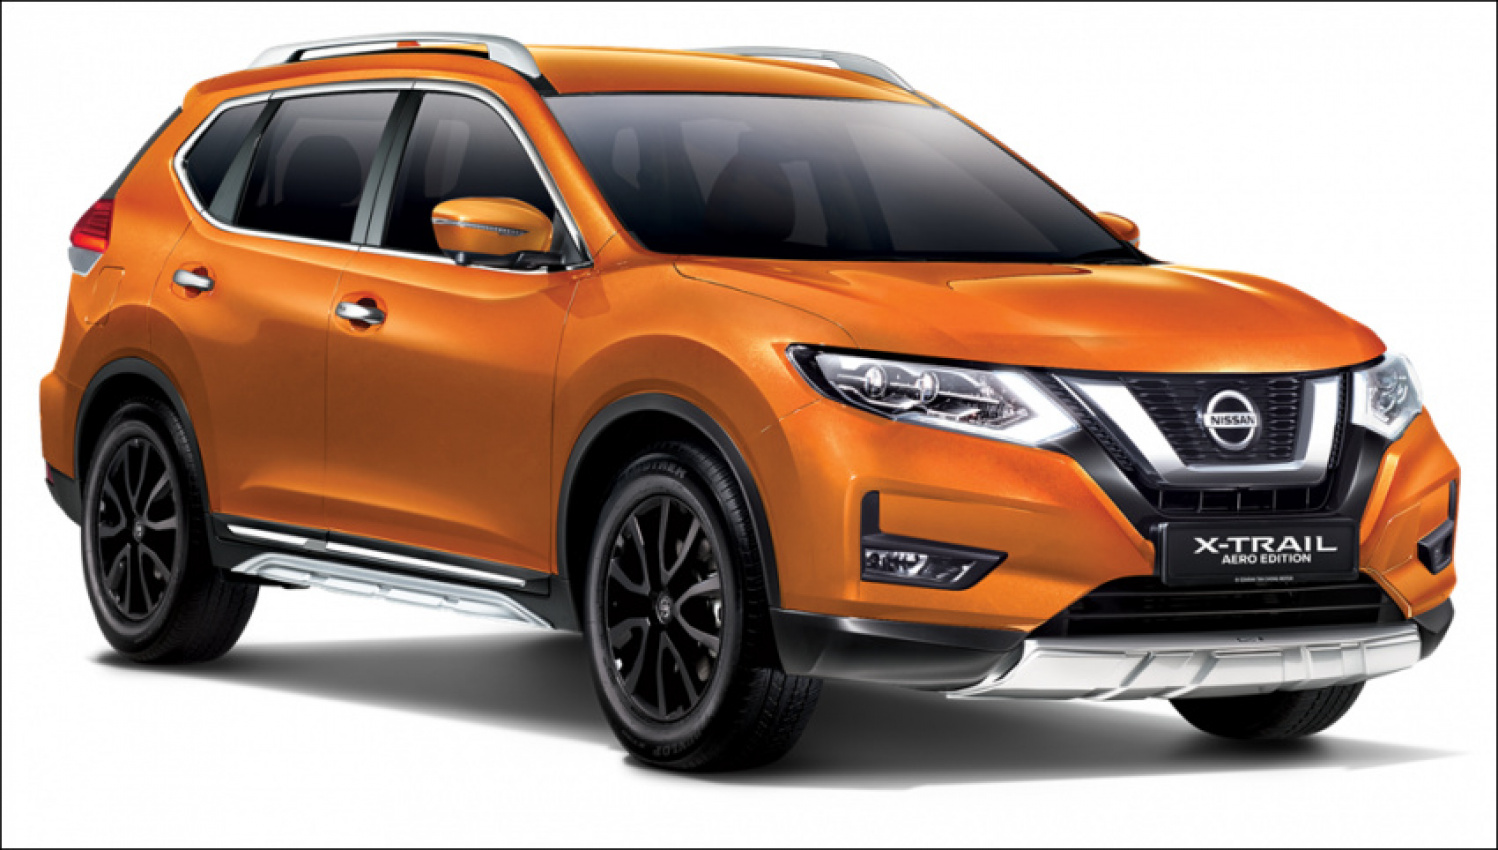 autos, cars, nissan, booststars, edaran tan chong motor, nissan almera turbo, nissan malaysia, nissan navara, nissan x-trail, sales promotion, a chance to become a ‘millionaire’ when purchasing a new nissan vehicle in march